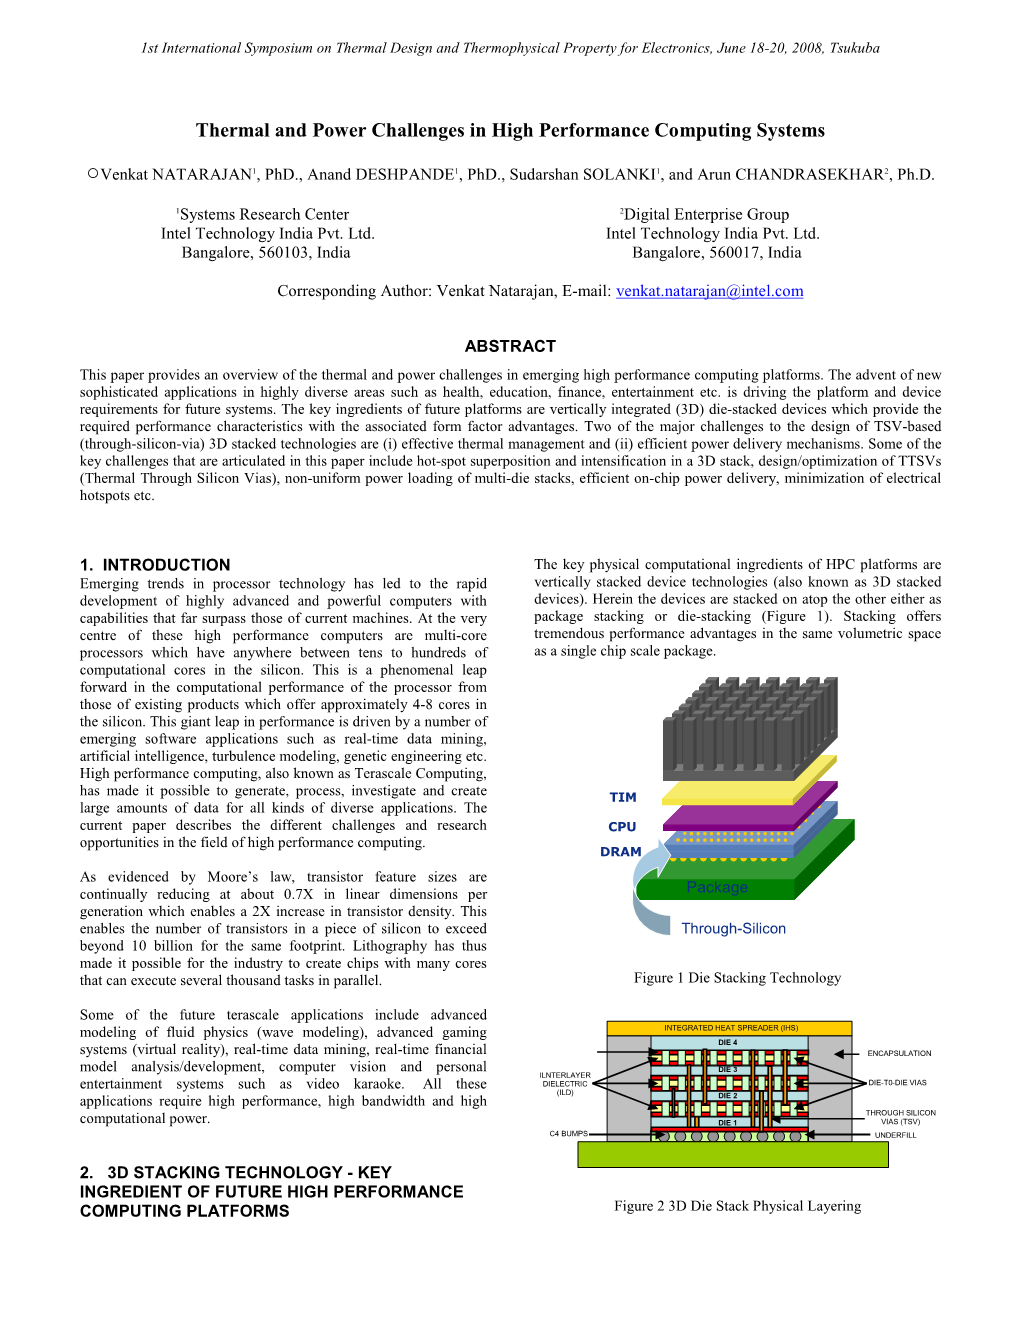 Thermal and Power Challenges in High Performance Computing Systems